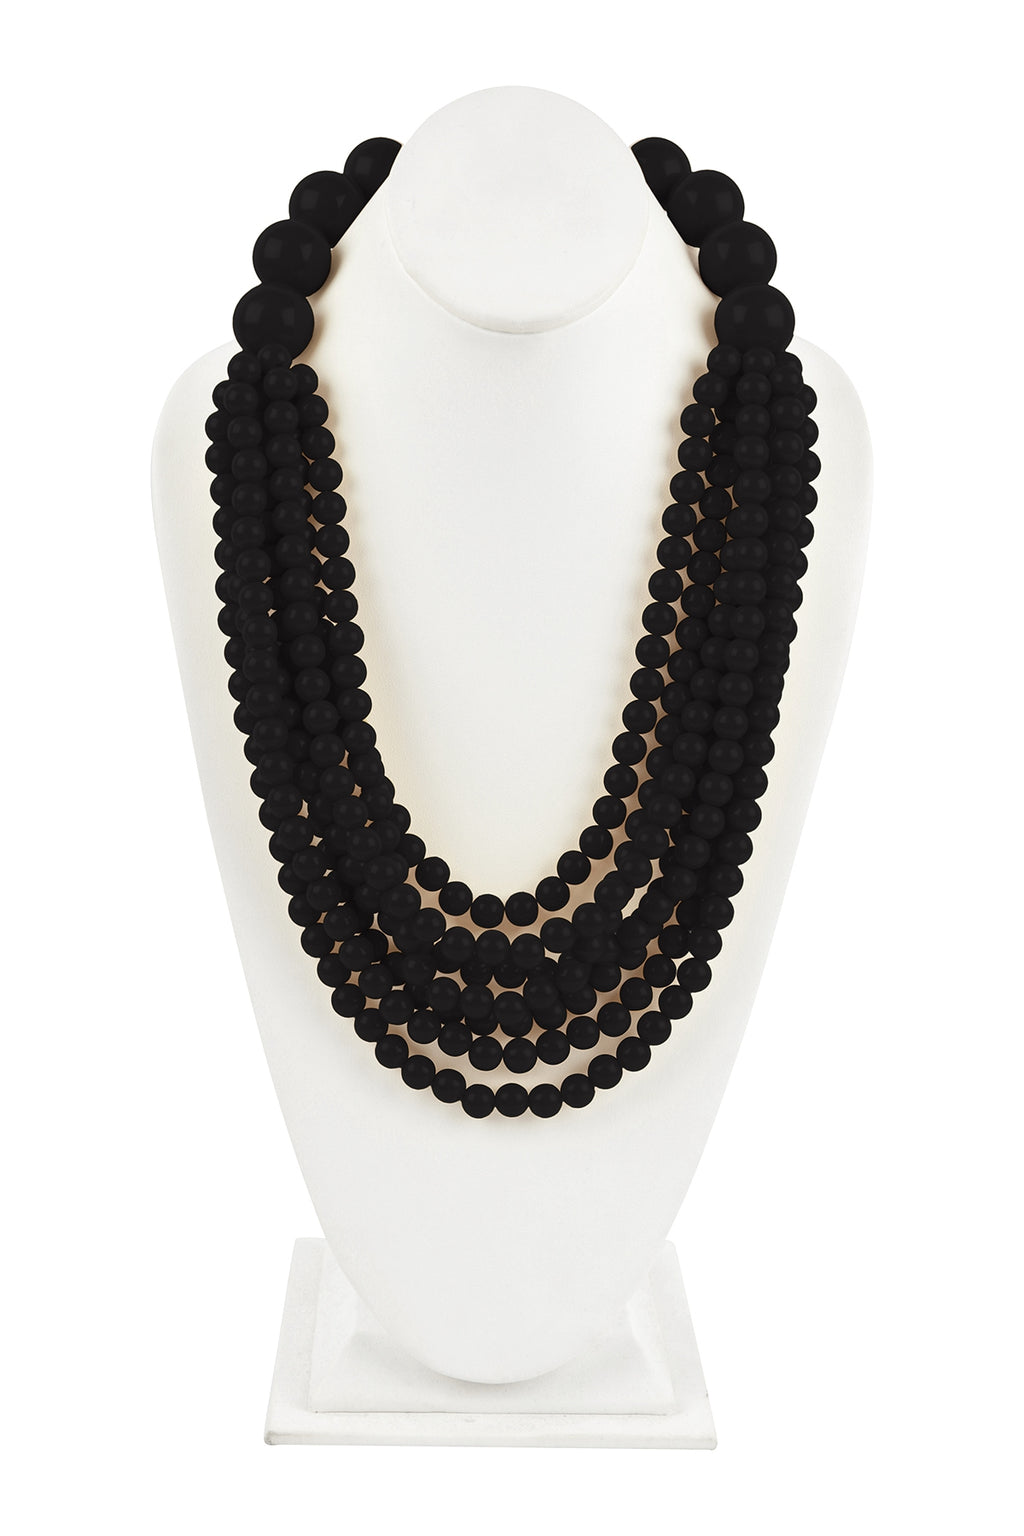 Round Bead Layered Statement Necklace and Earring Set Black - Pack of 6